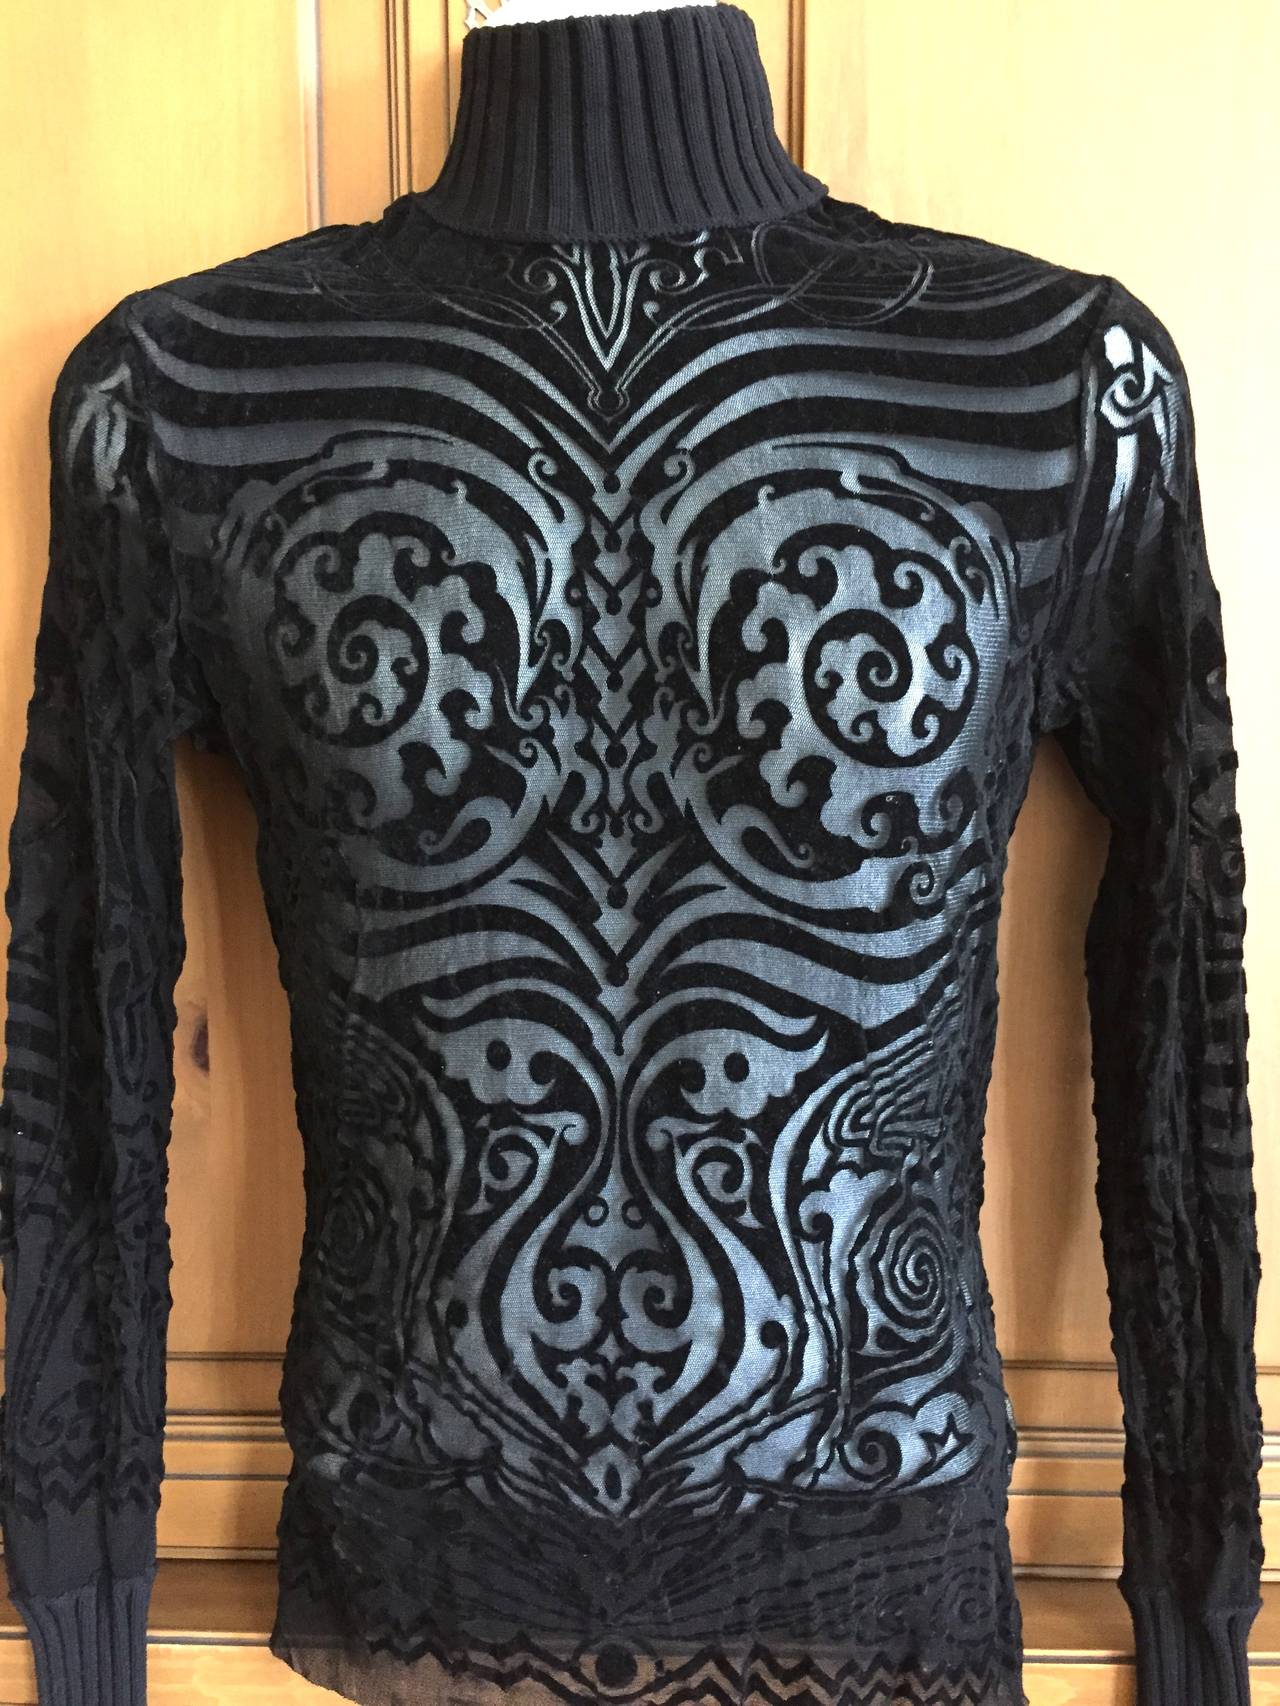 Jean Paul Gaultier Rare Vintage Men's Tattoo Shirt.
Sheer cut out in this tattoo pattern is amazing.
Ribbed wool cuffs and collar
Chest 40